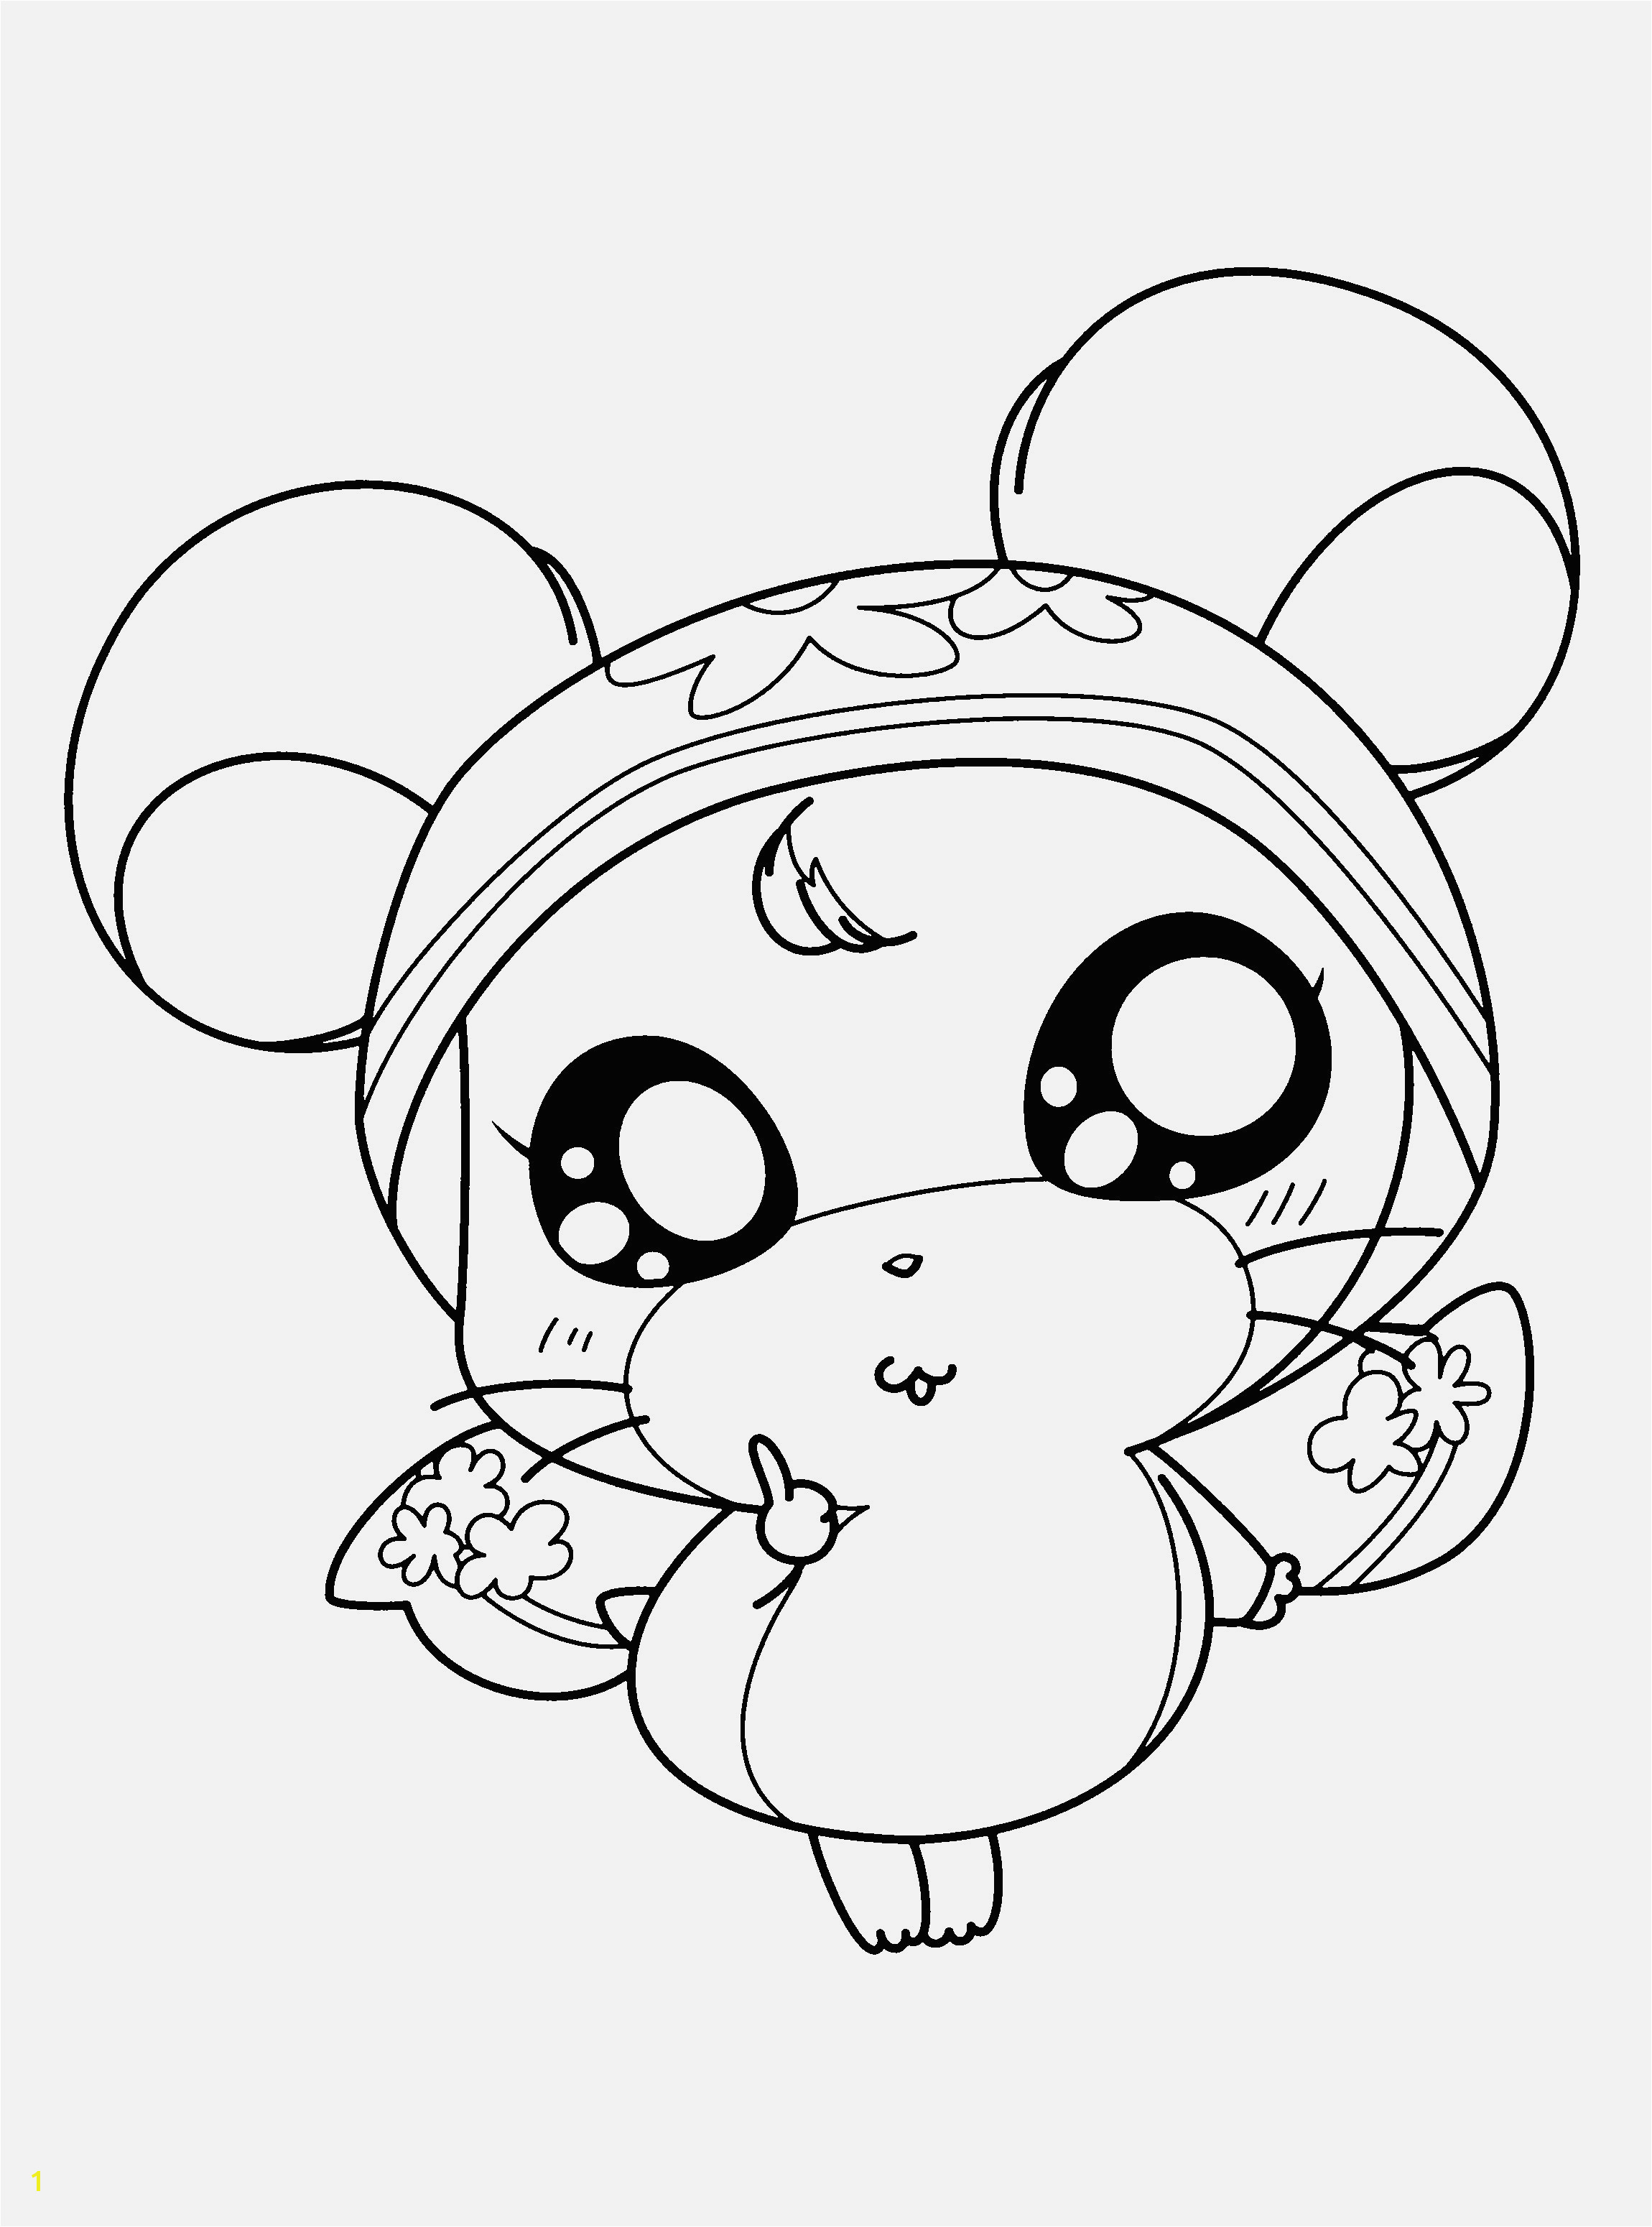 Care Bear Coloring Pages Printable Care Bear Coloring Pages